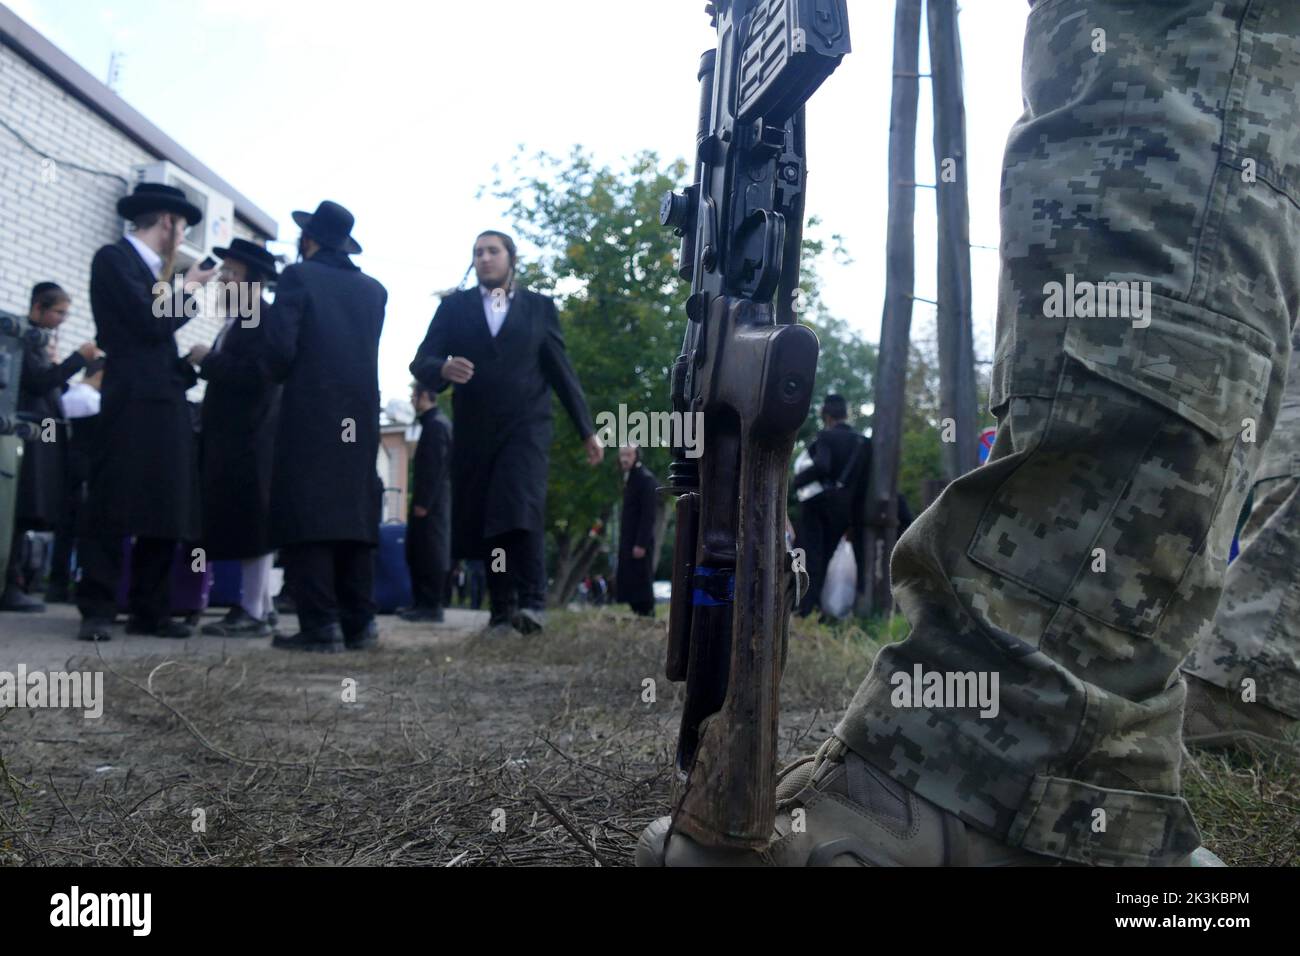 UMAN, UKRAINE - SEPTEMBER 25, 2022 - An armed serviceman stands guard as Hasidic pilgrims gather for the celebration of Rosh Hashanah, or the Jewish N Stock Photo